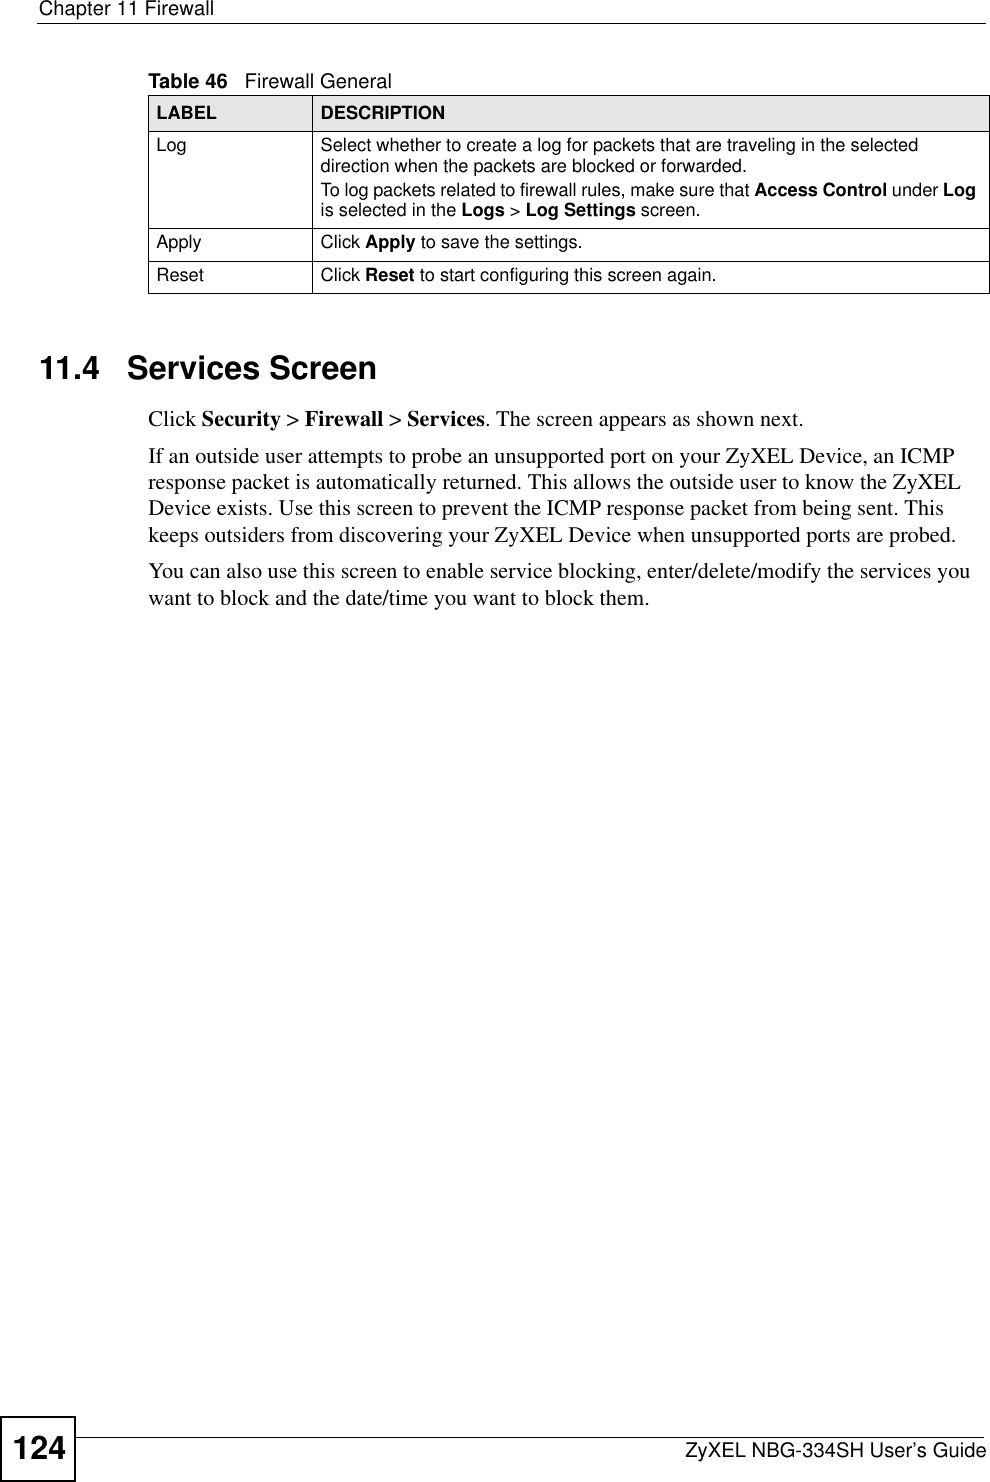 Chapter 11 FirewallZyXEL NBG-334SH User’s Guide12411.4   Services ScreenClick Security &gt; Firewall &gt; Services. The screen appears as shown next. If an outside user attempts to probe an unsupported port on your ZyXEL Device, an ICMP response packet is automatically returned. This allows the outside user to know the ZyXEL Device exists. Use this screen to prevent the ICMP response packet from being sent. This keeps outsiders from discovering your ZyXEL Device when unsupported ports are probed.You can also use this screen to enable service blocking, enter/delete/modify the services you want to block and the date/time you want to block them.Log Select whether to create a log for packets that are traveling in the selected direction when the packets are blocked or forwarded.To log packets related to firewall rules, make sure that Access Control under Logis selected in the Logs &gt; Log Settings screen. Apply Click Apply to save the settings. Reset Click Reset to start configuring this screen again. Table 46   Firewall GeneralLABEL DESCRIPTION